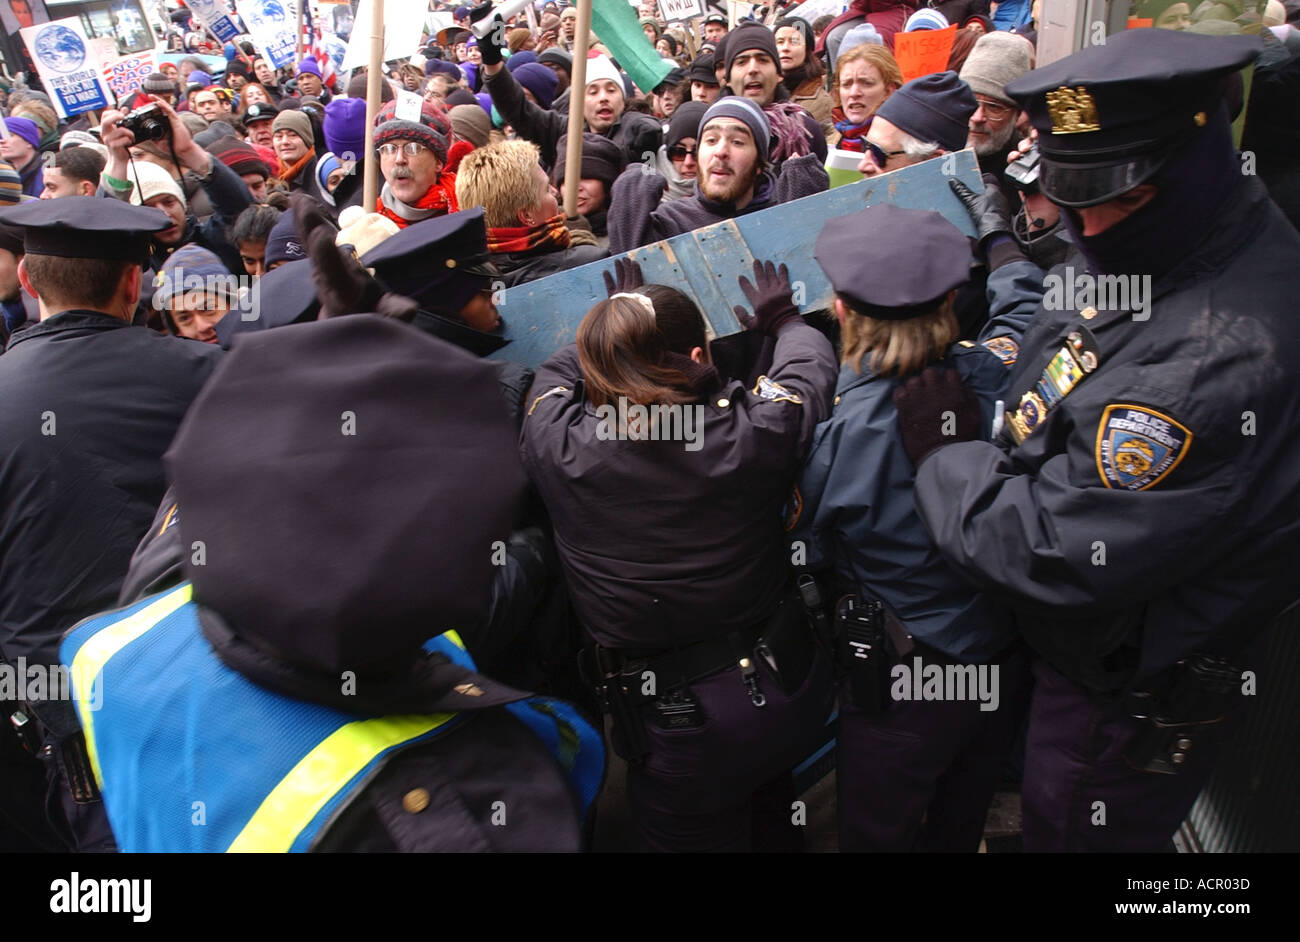 Riot People battle with police as they storm the police line during an Iraq war protest in New York City Stock Photo